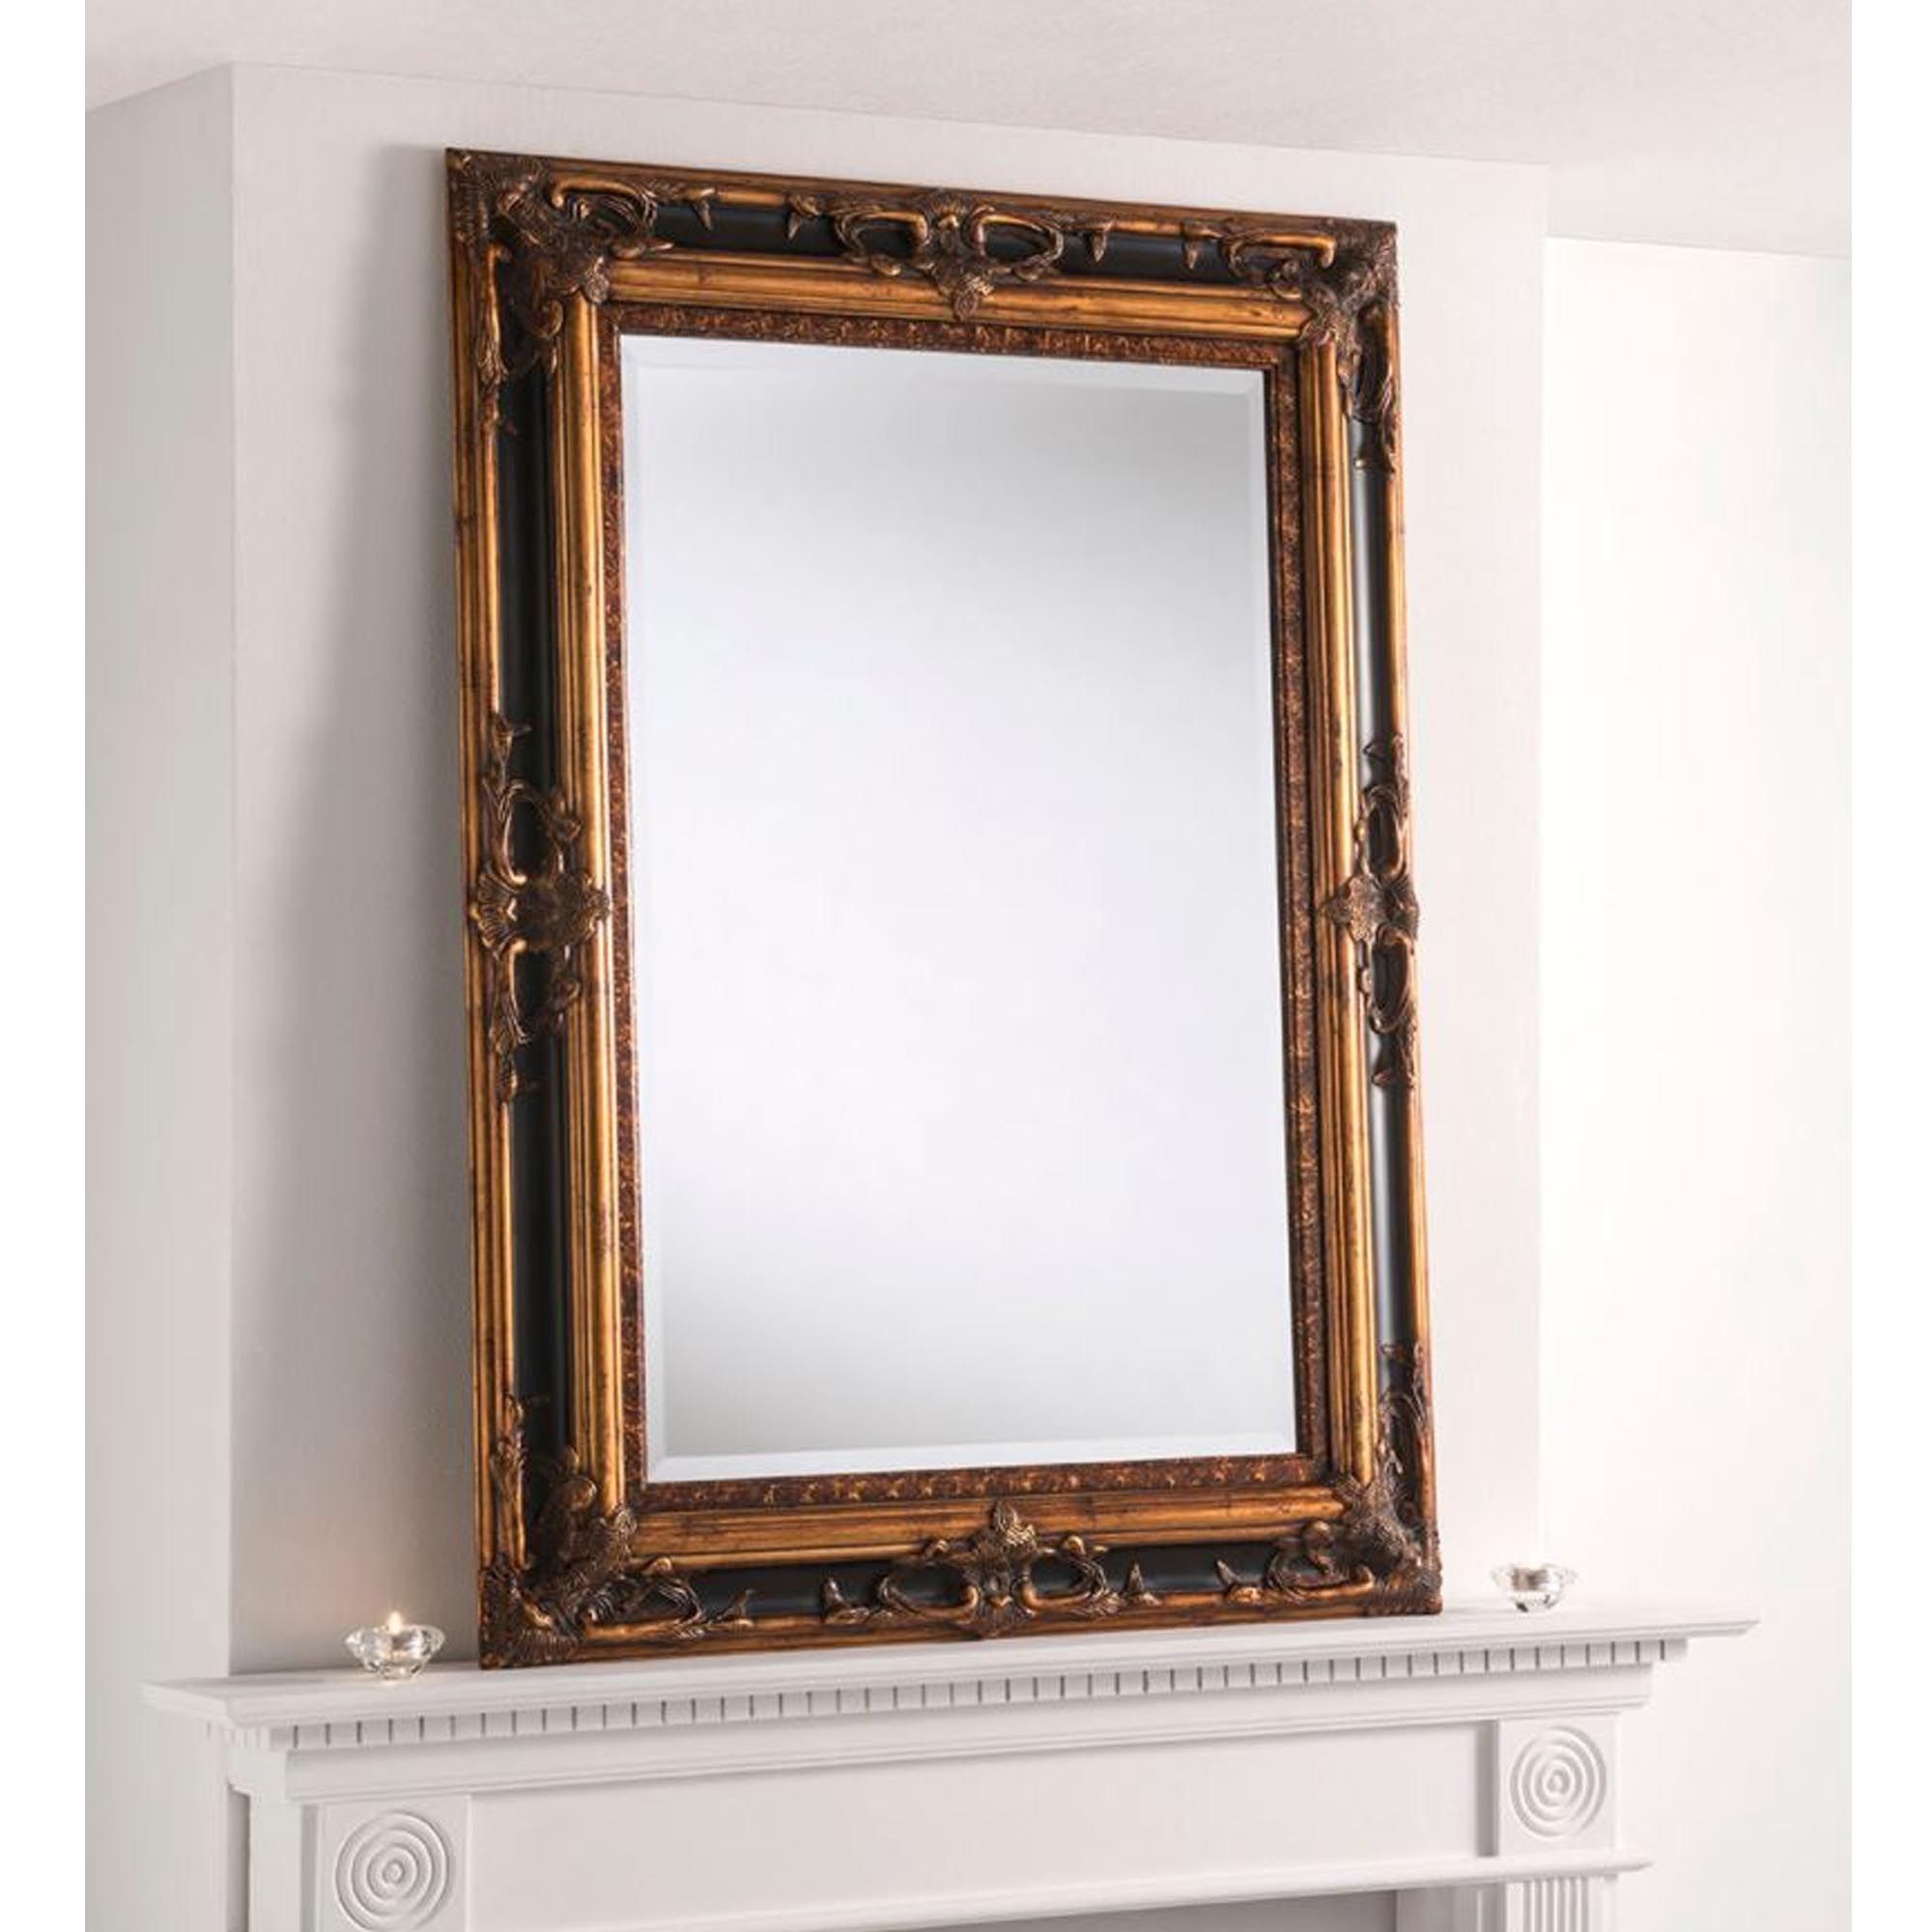 Tuscany Antique French Style Black And Gold Wall Mirror | Hd365 Throughout Antique Gold Scallop Wall Mirrors (View 2 of 15)